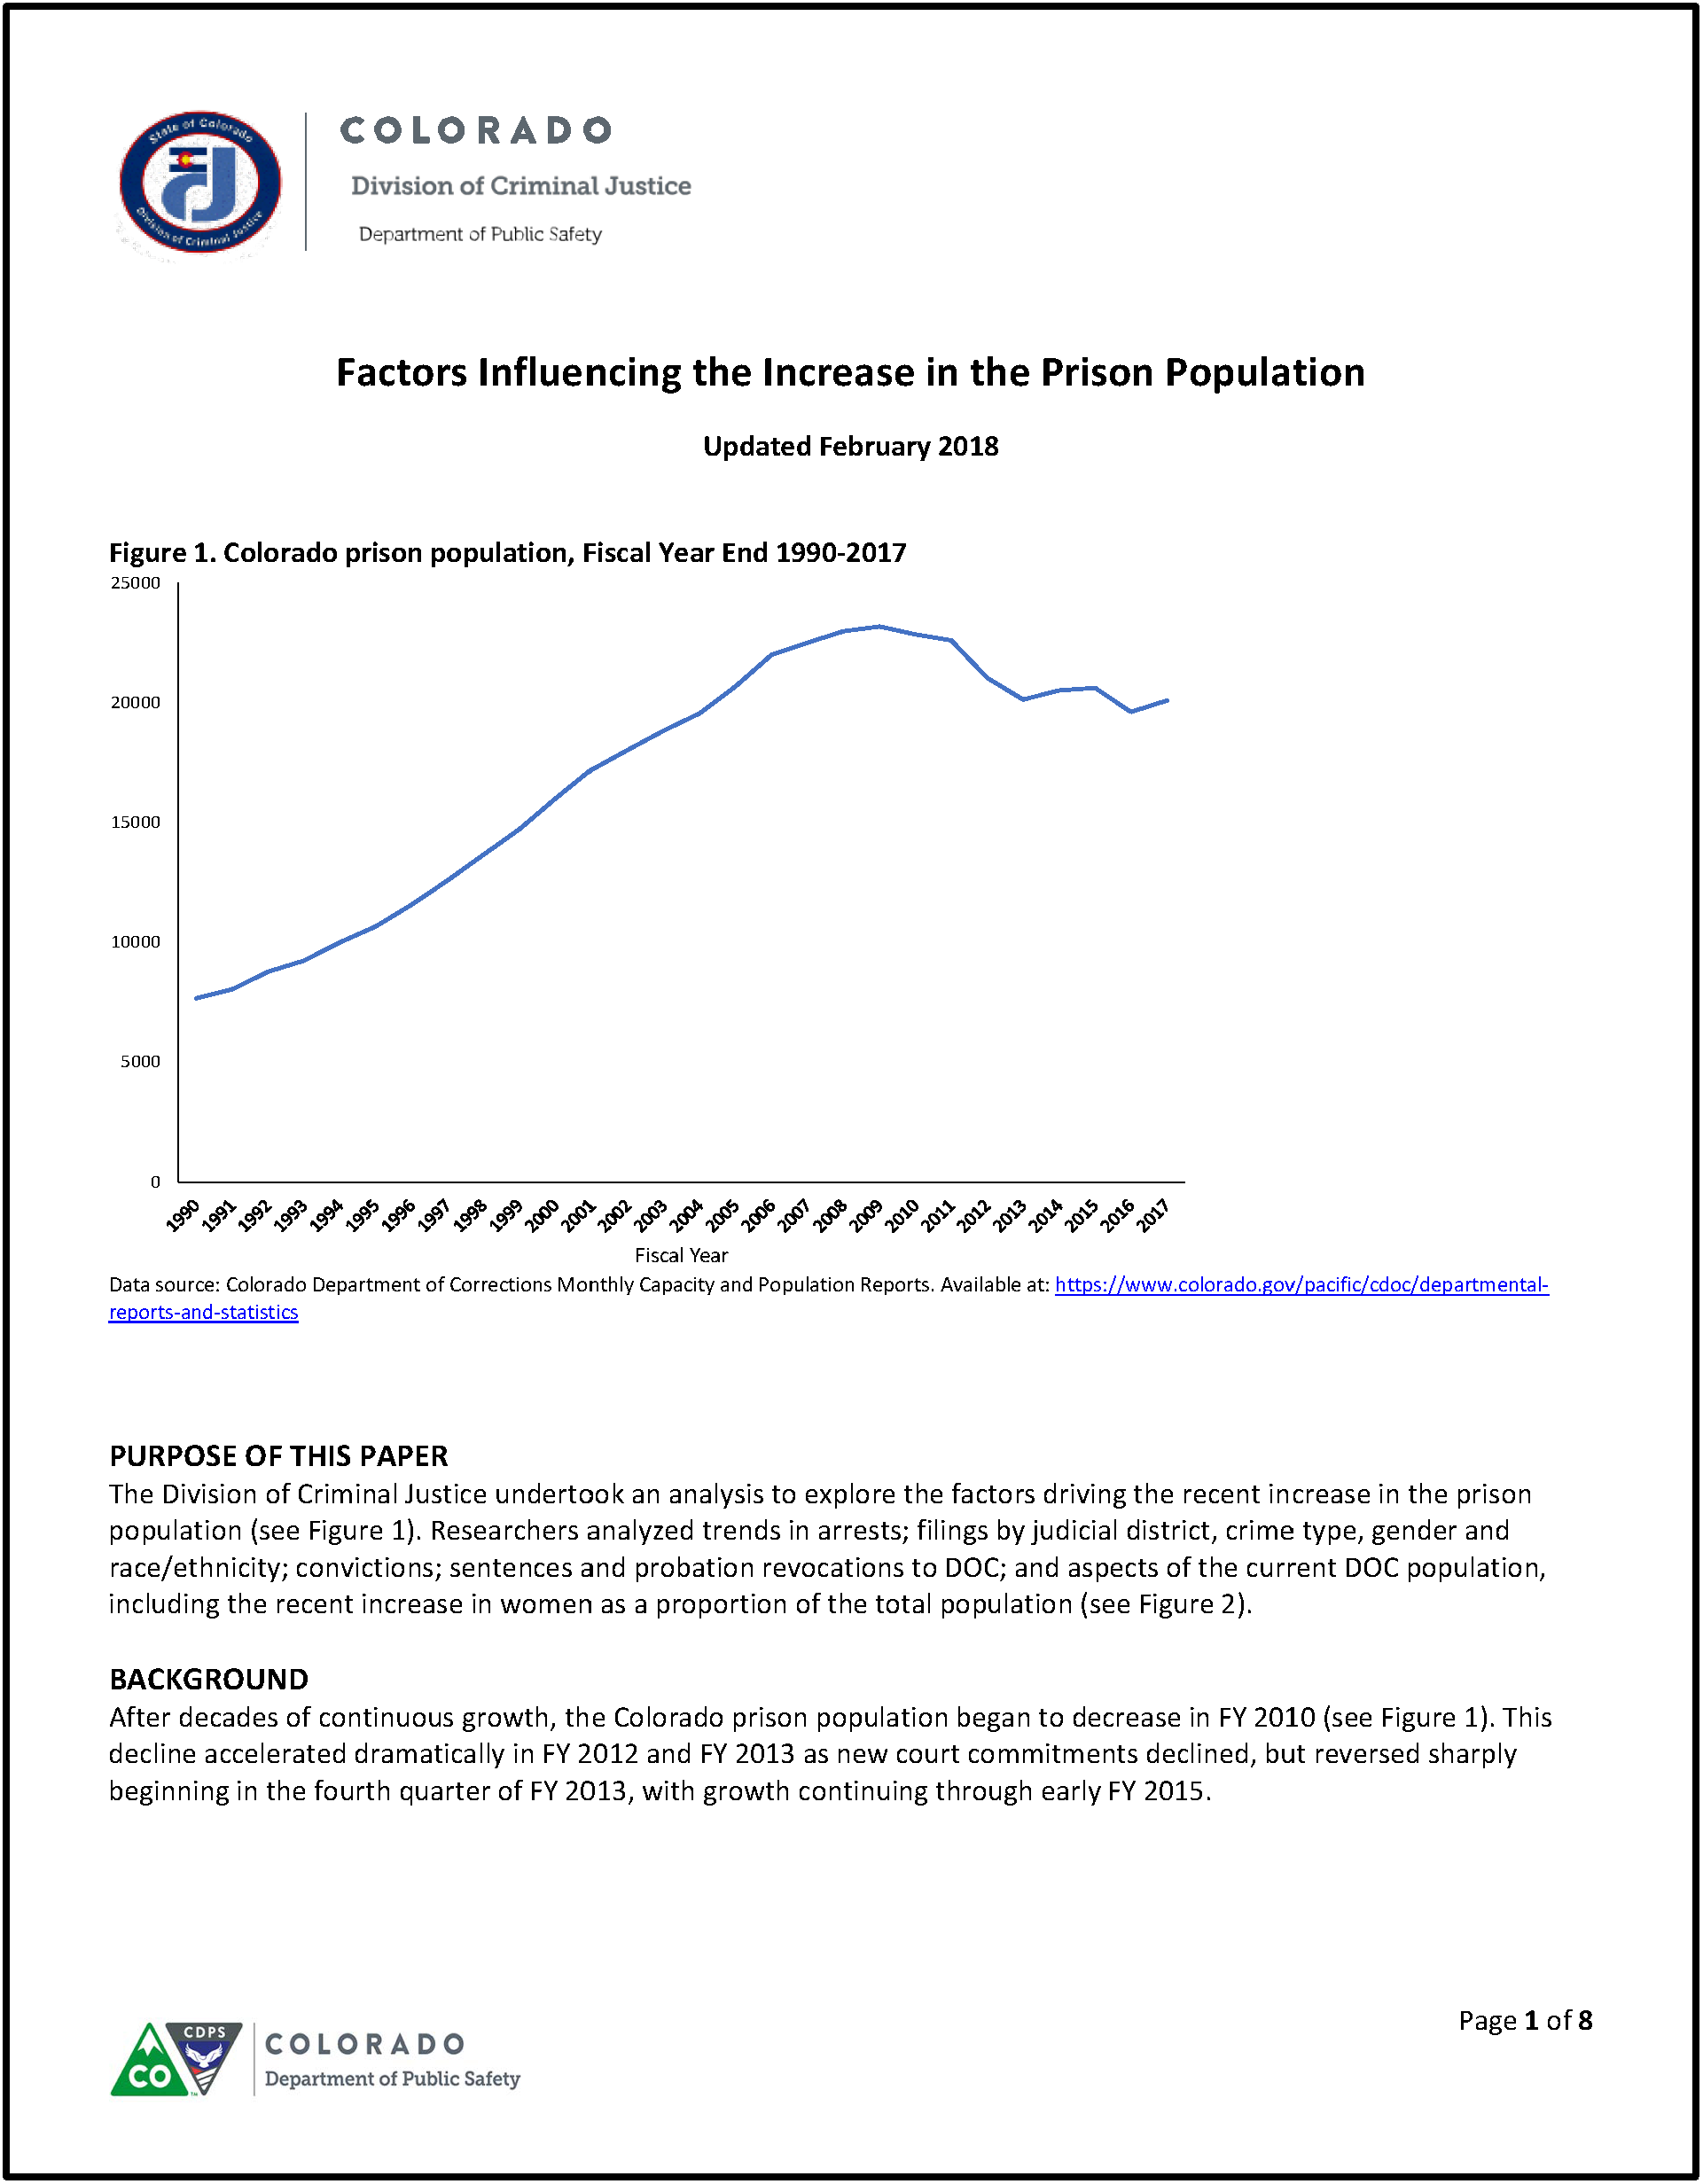 Factors Influencing the Increase in the Colorado Prison Population: FY 2012-2017  (February 2018)